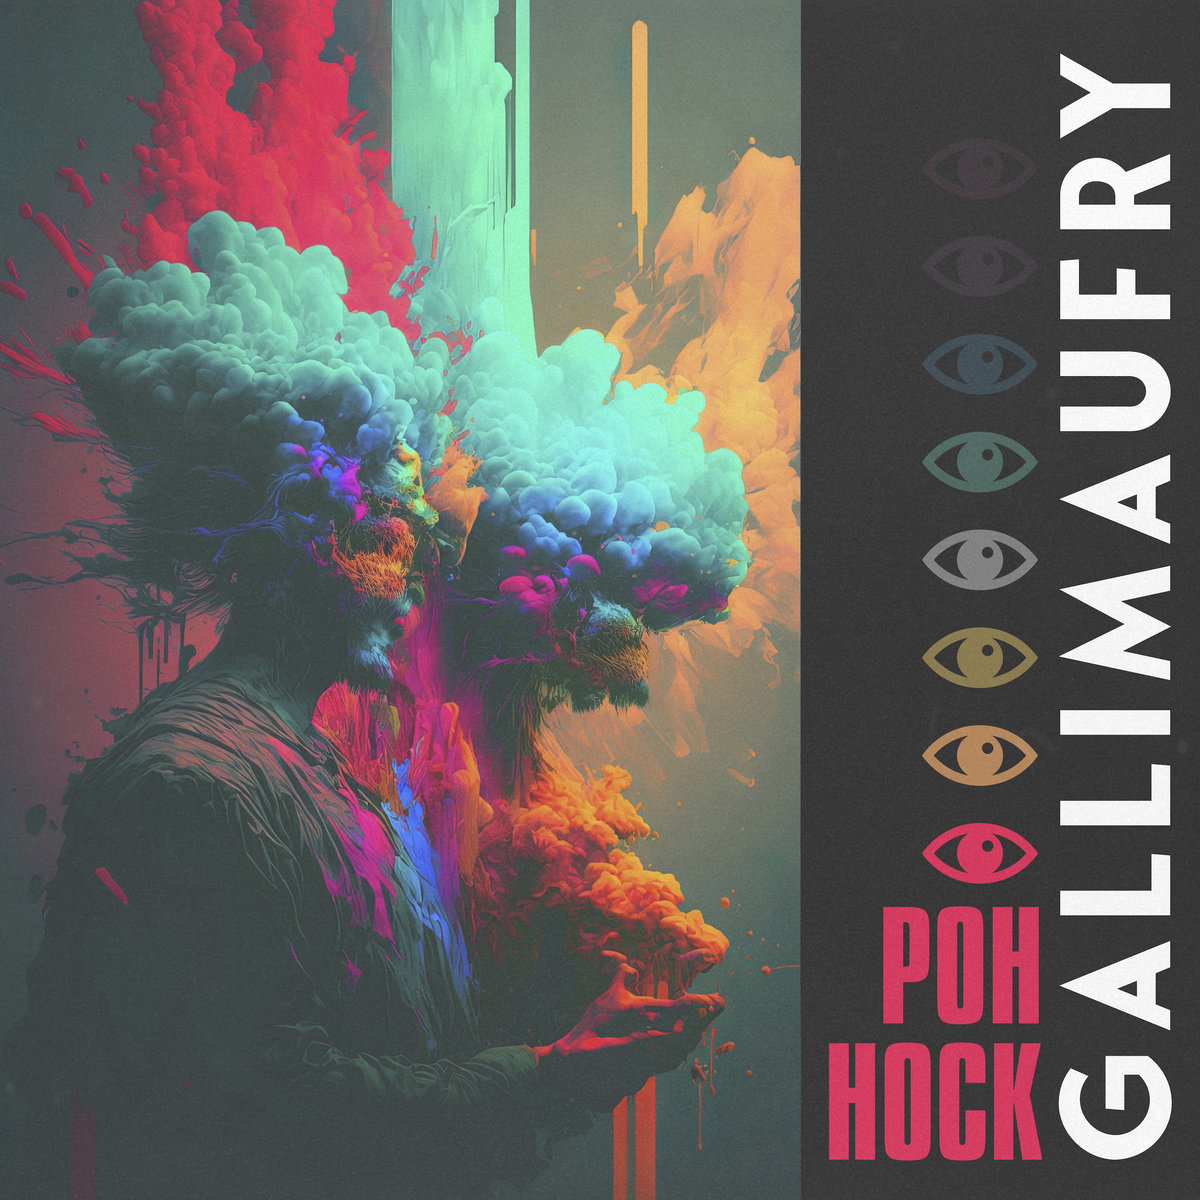 PohHock_Gallimaufry